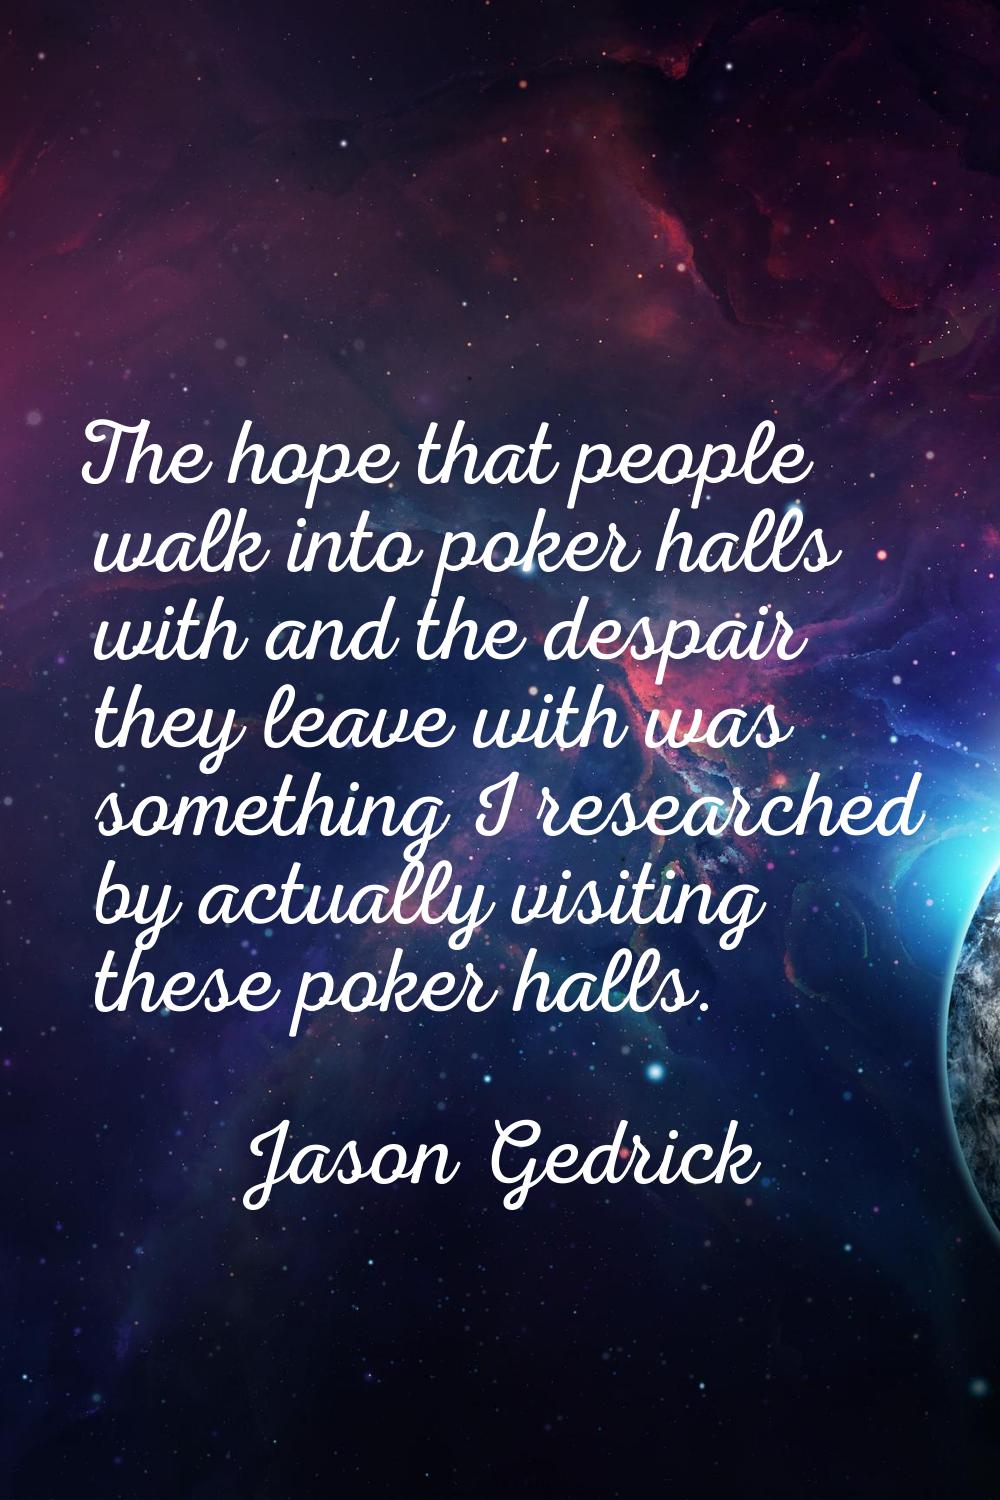 The hope that people walk into poker halls with and the despair they leave with was something I res